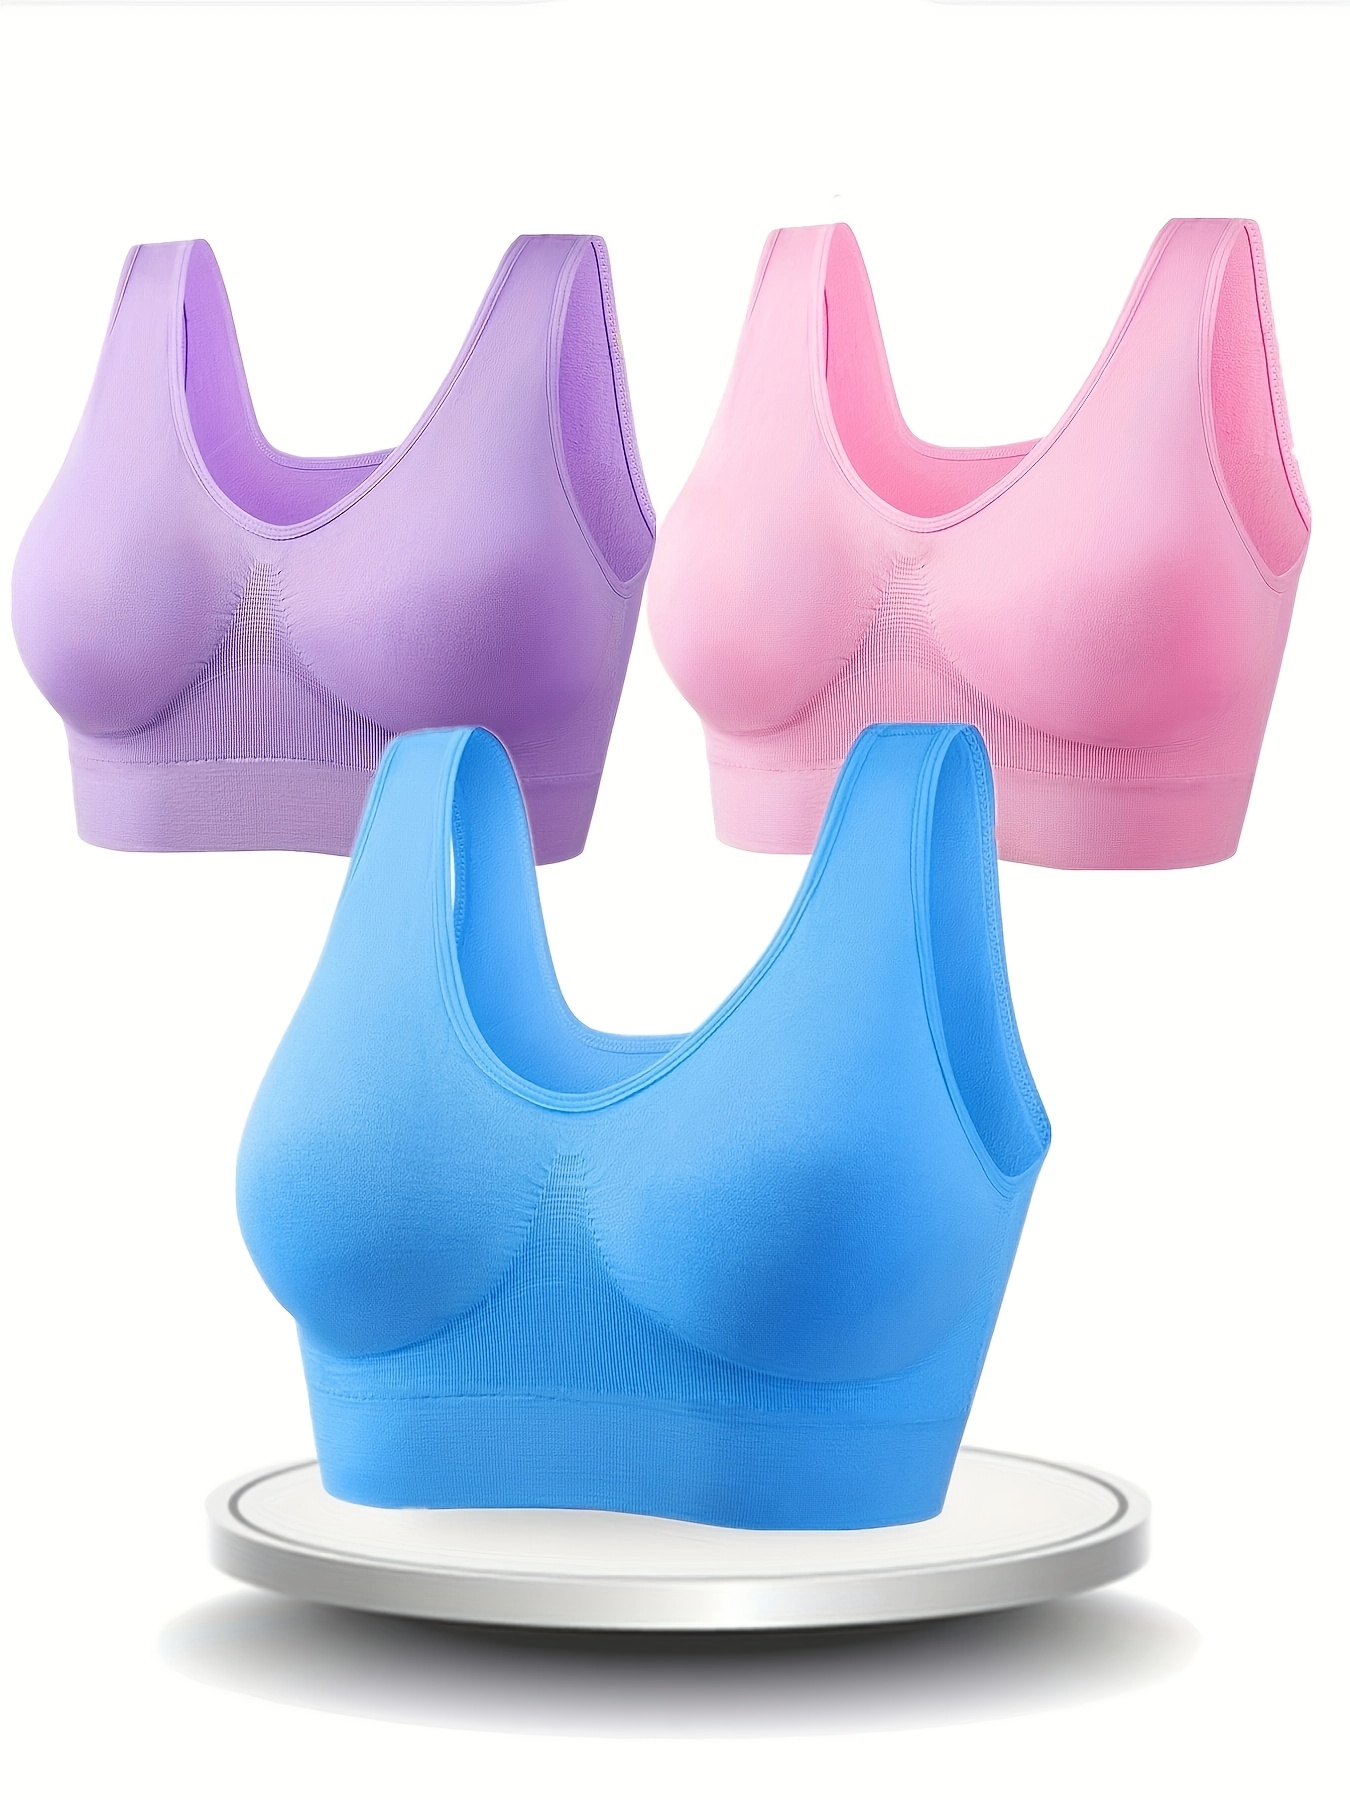 Fashiol Sports bra Lighty Padded Non Wired For Women (Multicolor) Women  Sports Non Padded Bra - Buy Fashiol Sports bra Lighty Padded Non Wired For  Women (Multicolor) Women Sports Non Padded Bra